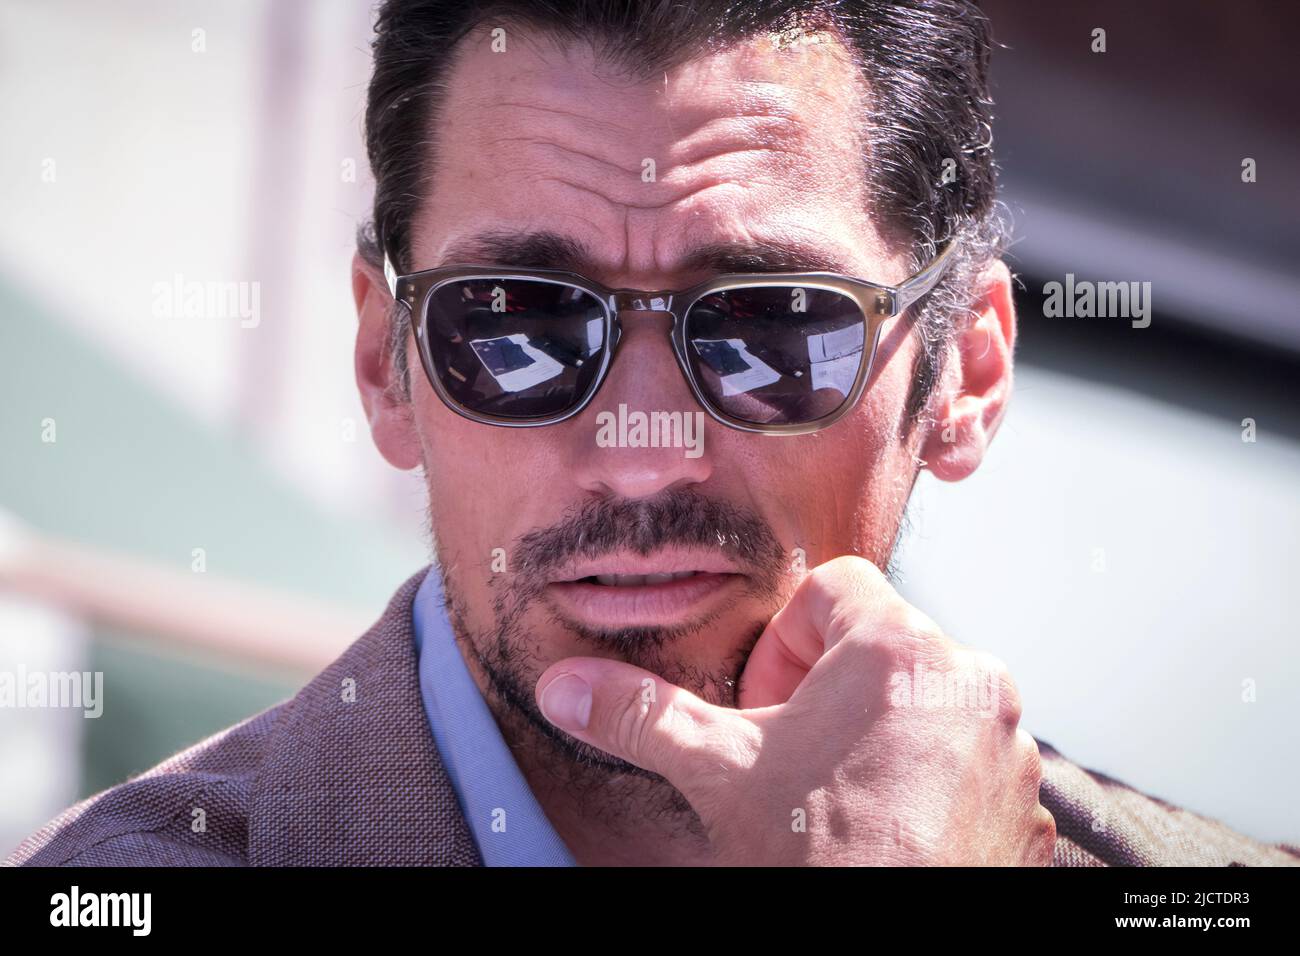 David Gandy at the Concours on Savile Row automobile show in London UK Stock Photo